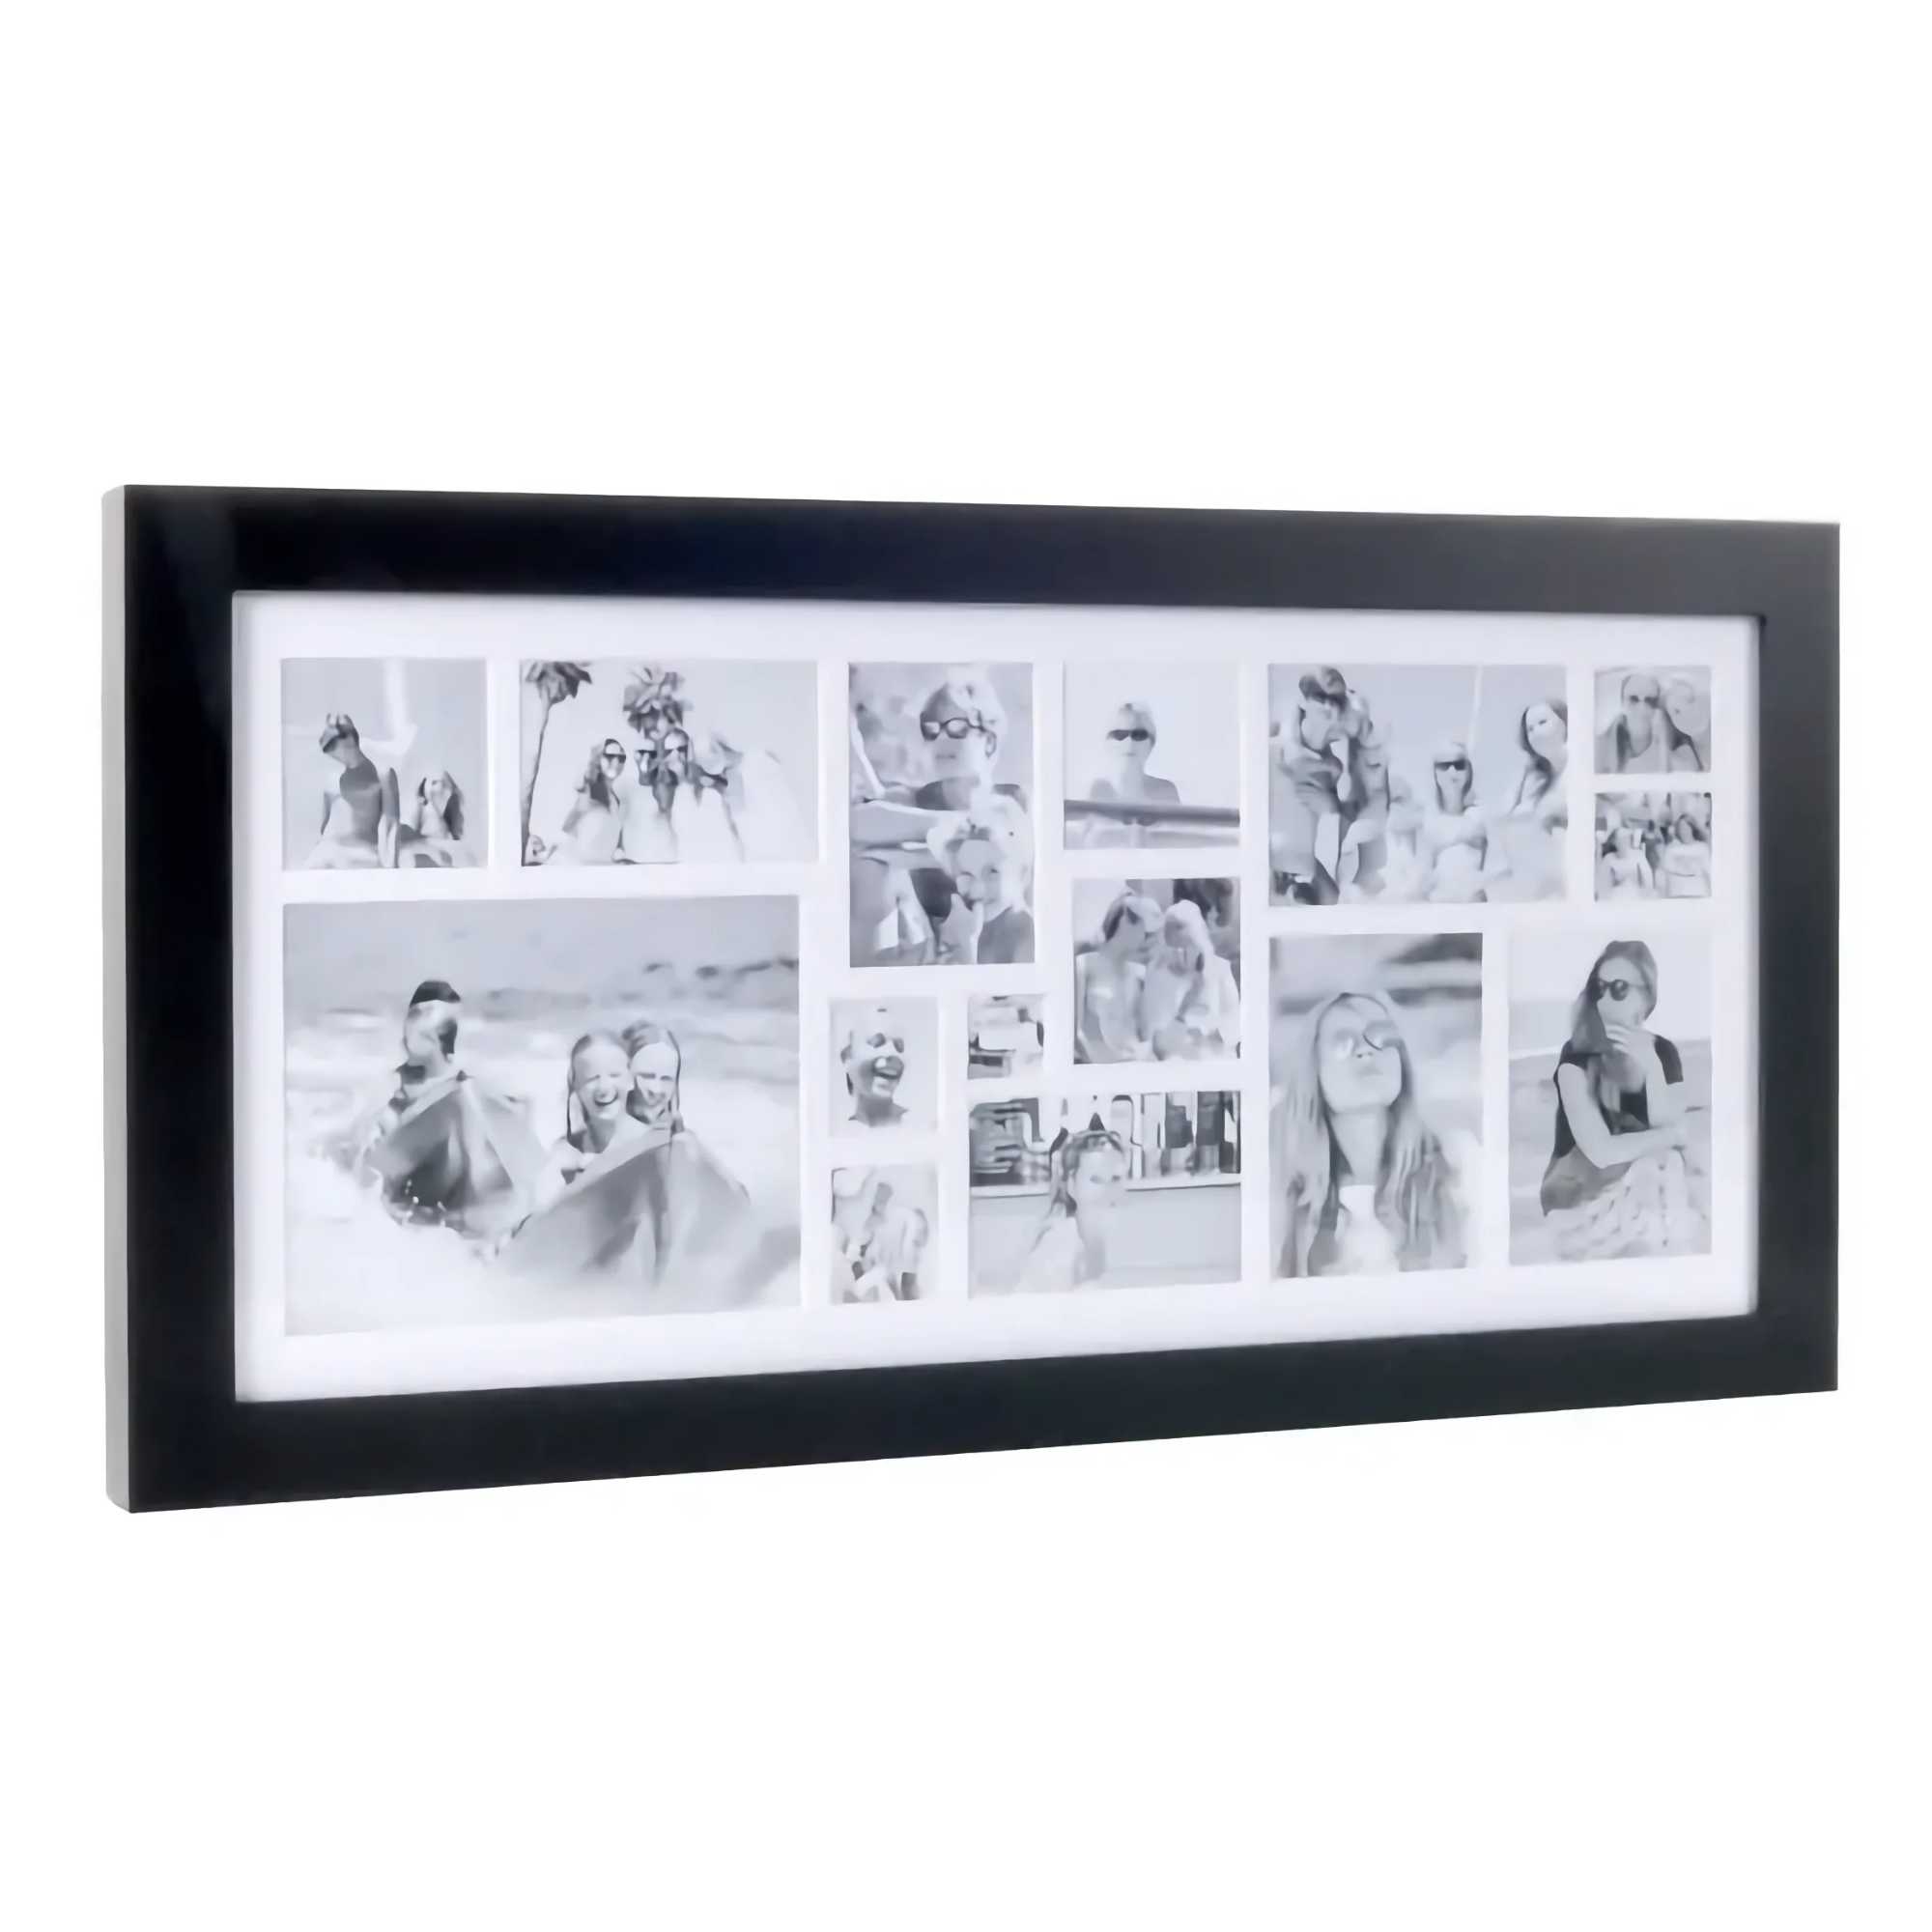 Umbra Luna Large 4x6 Picture Frame Collage and Wall Décor, White